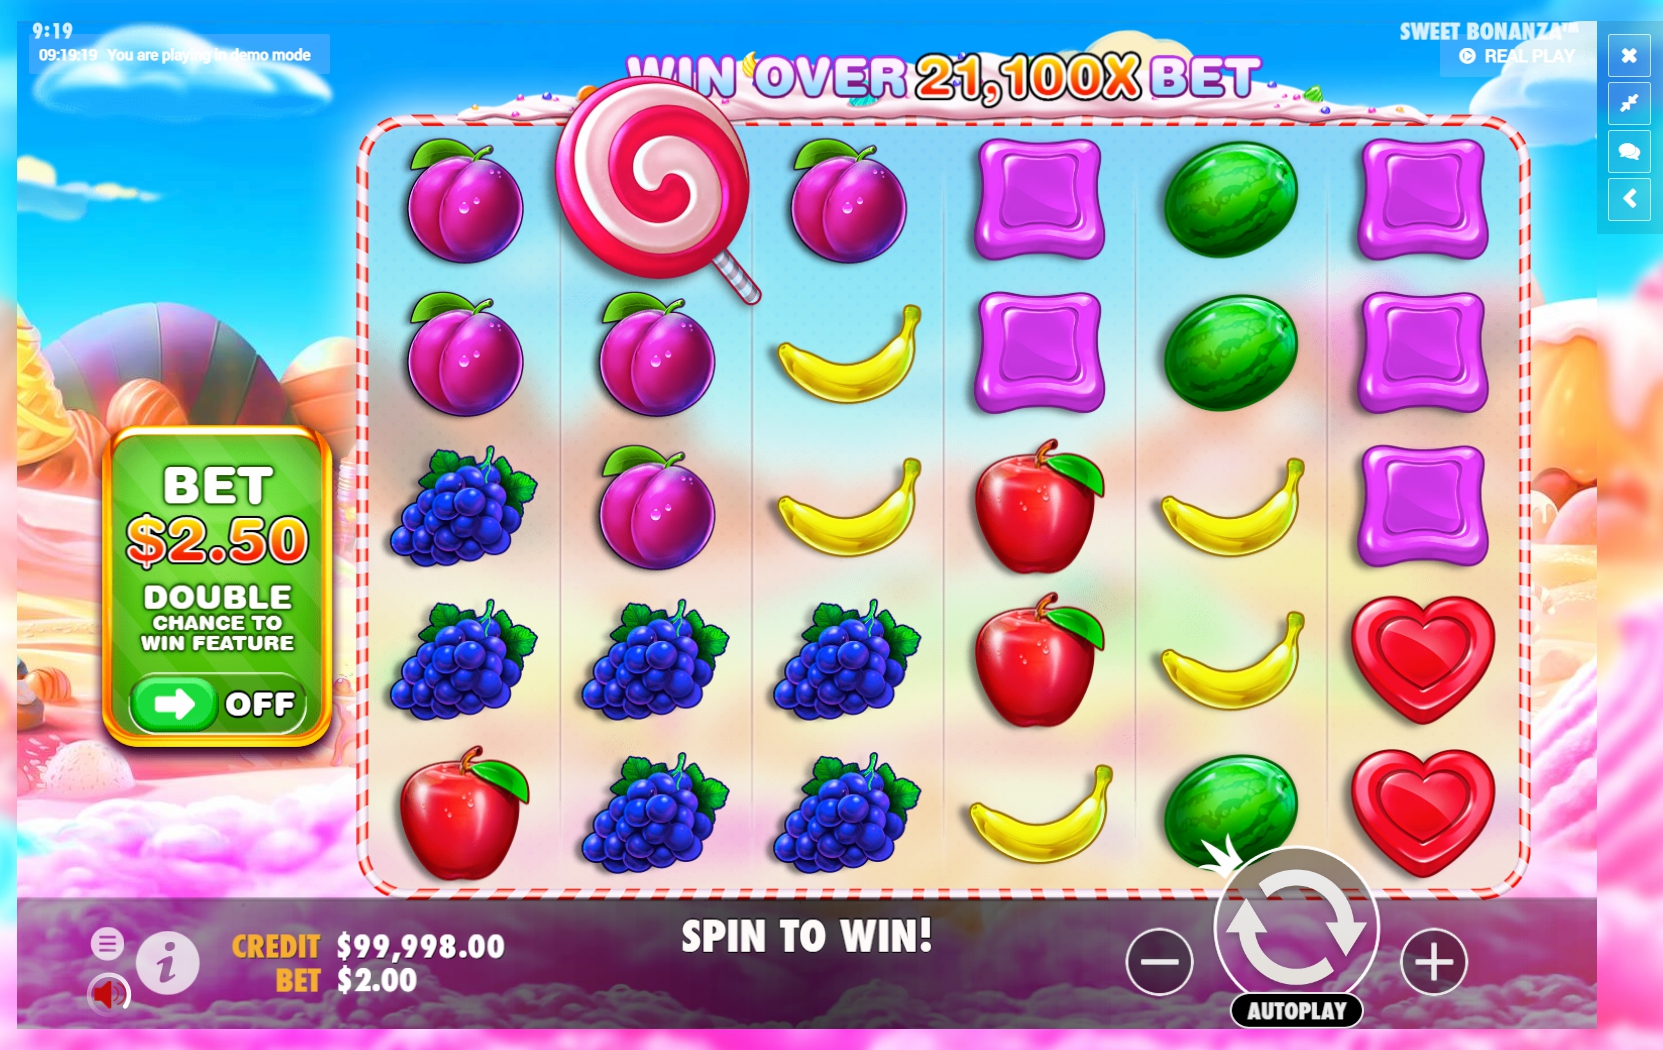 National Lottery Casino Slot Games